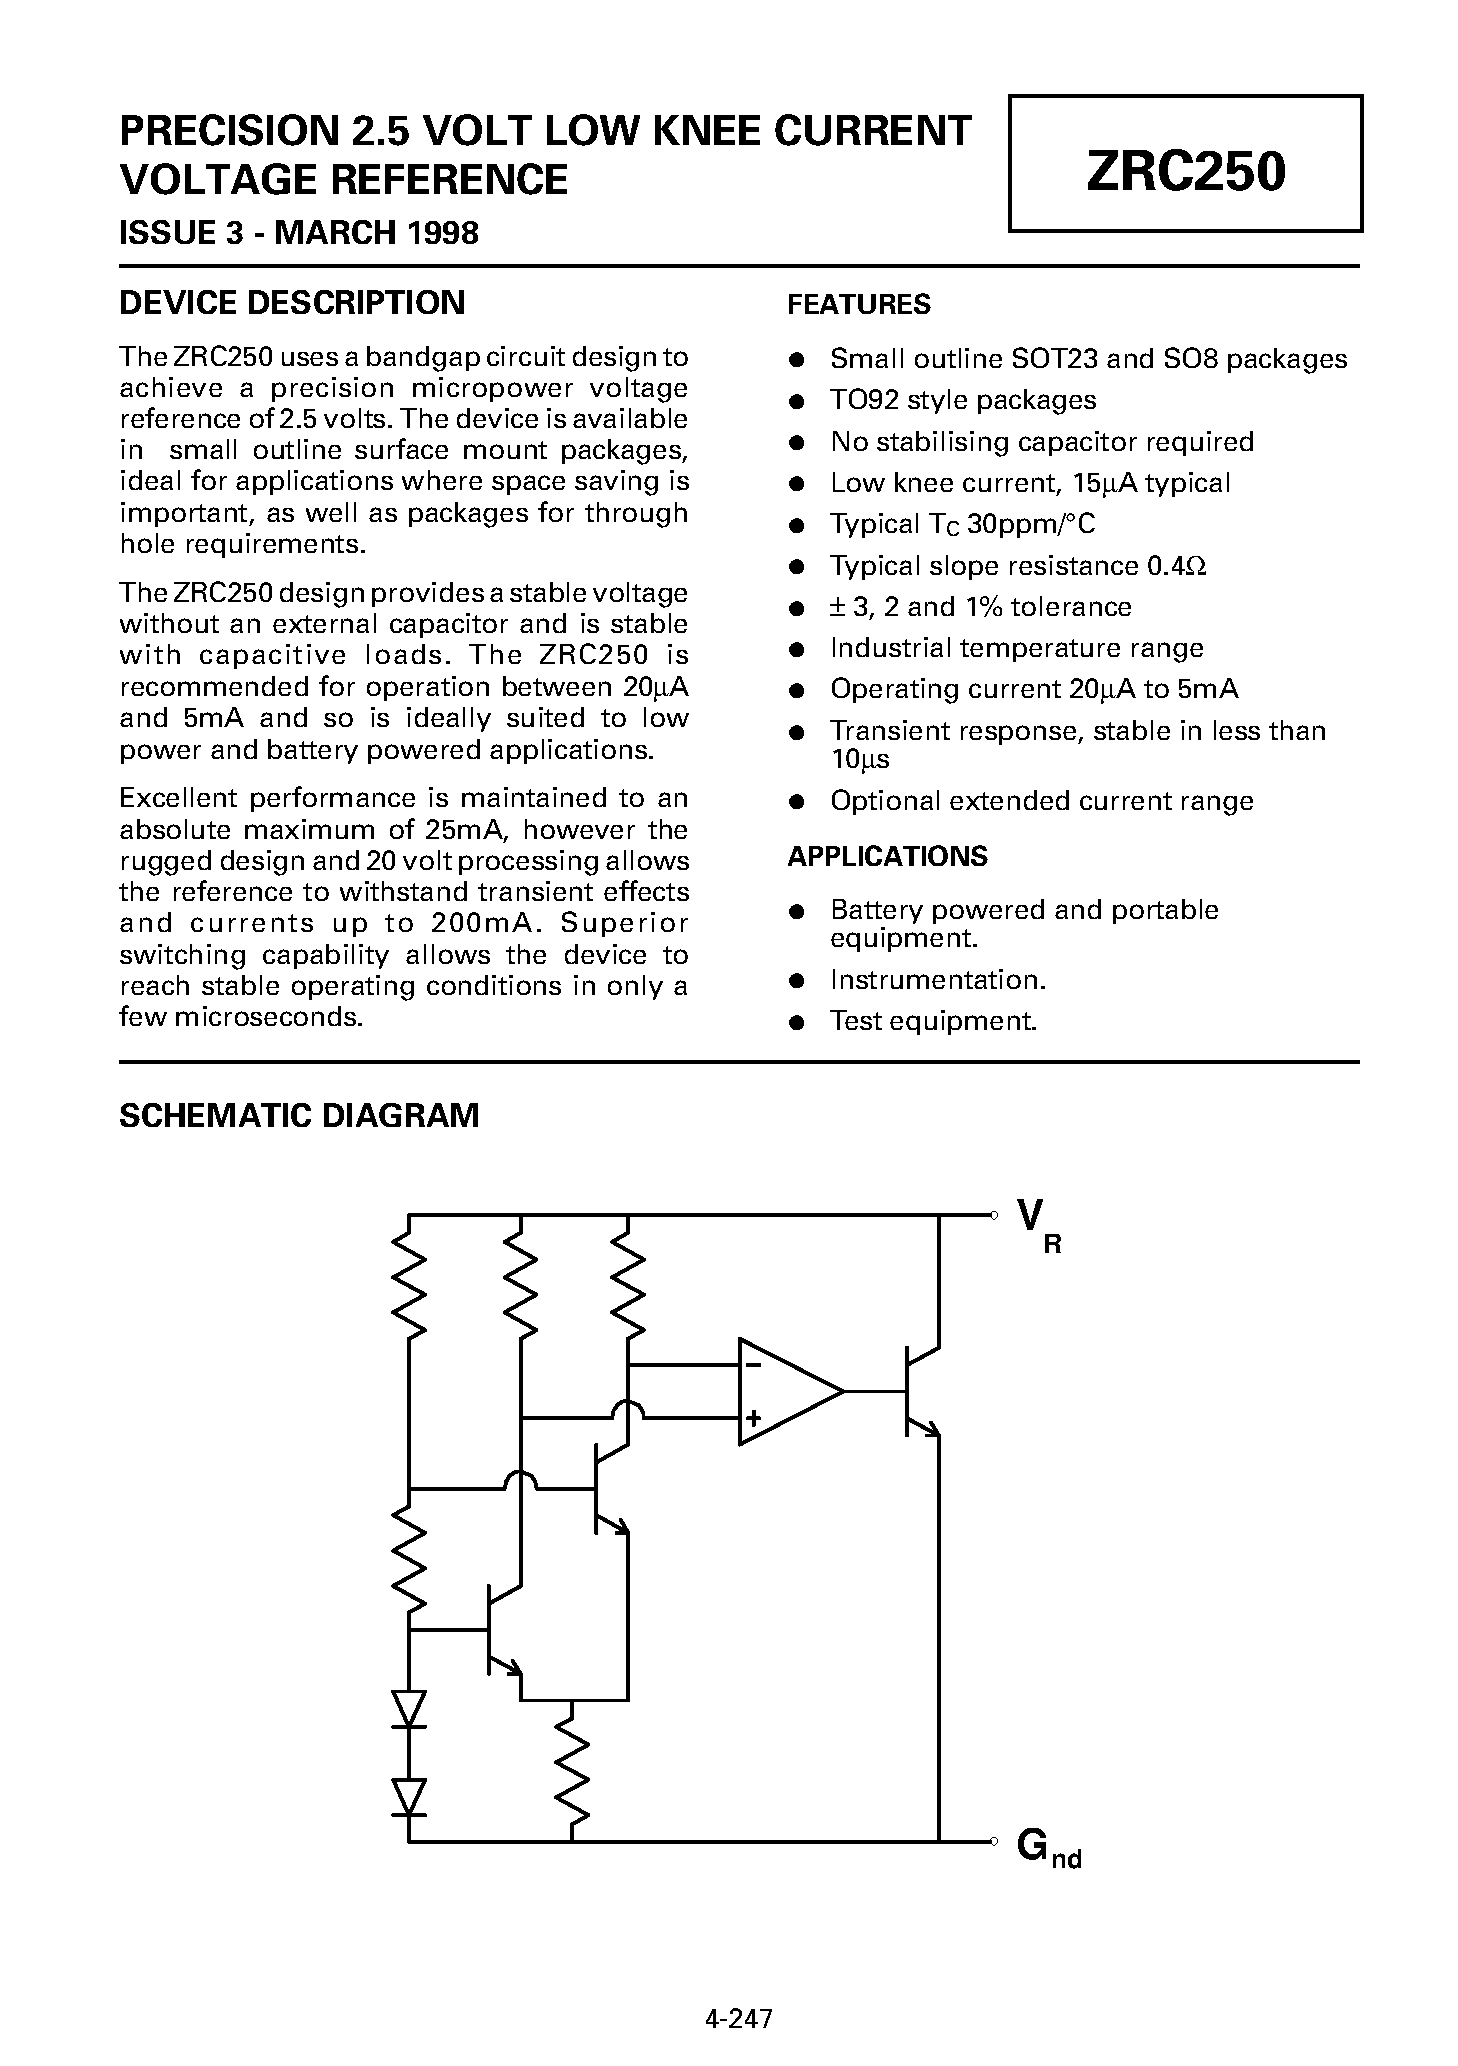 Datasheet ZRC250 - PRECISION 2.5 VOLT LOW KNEE CURRENT VOLTAGE REFERENCE page 1